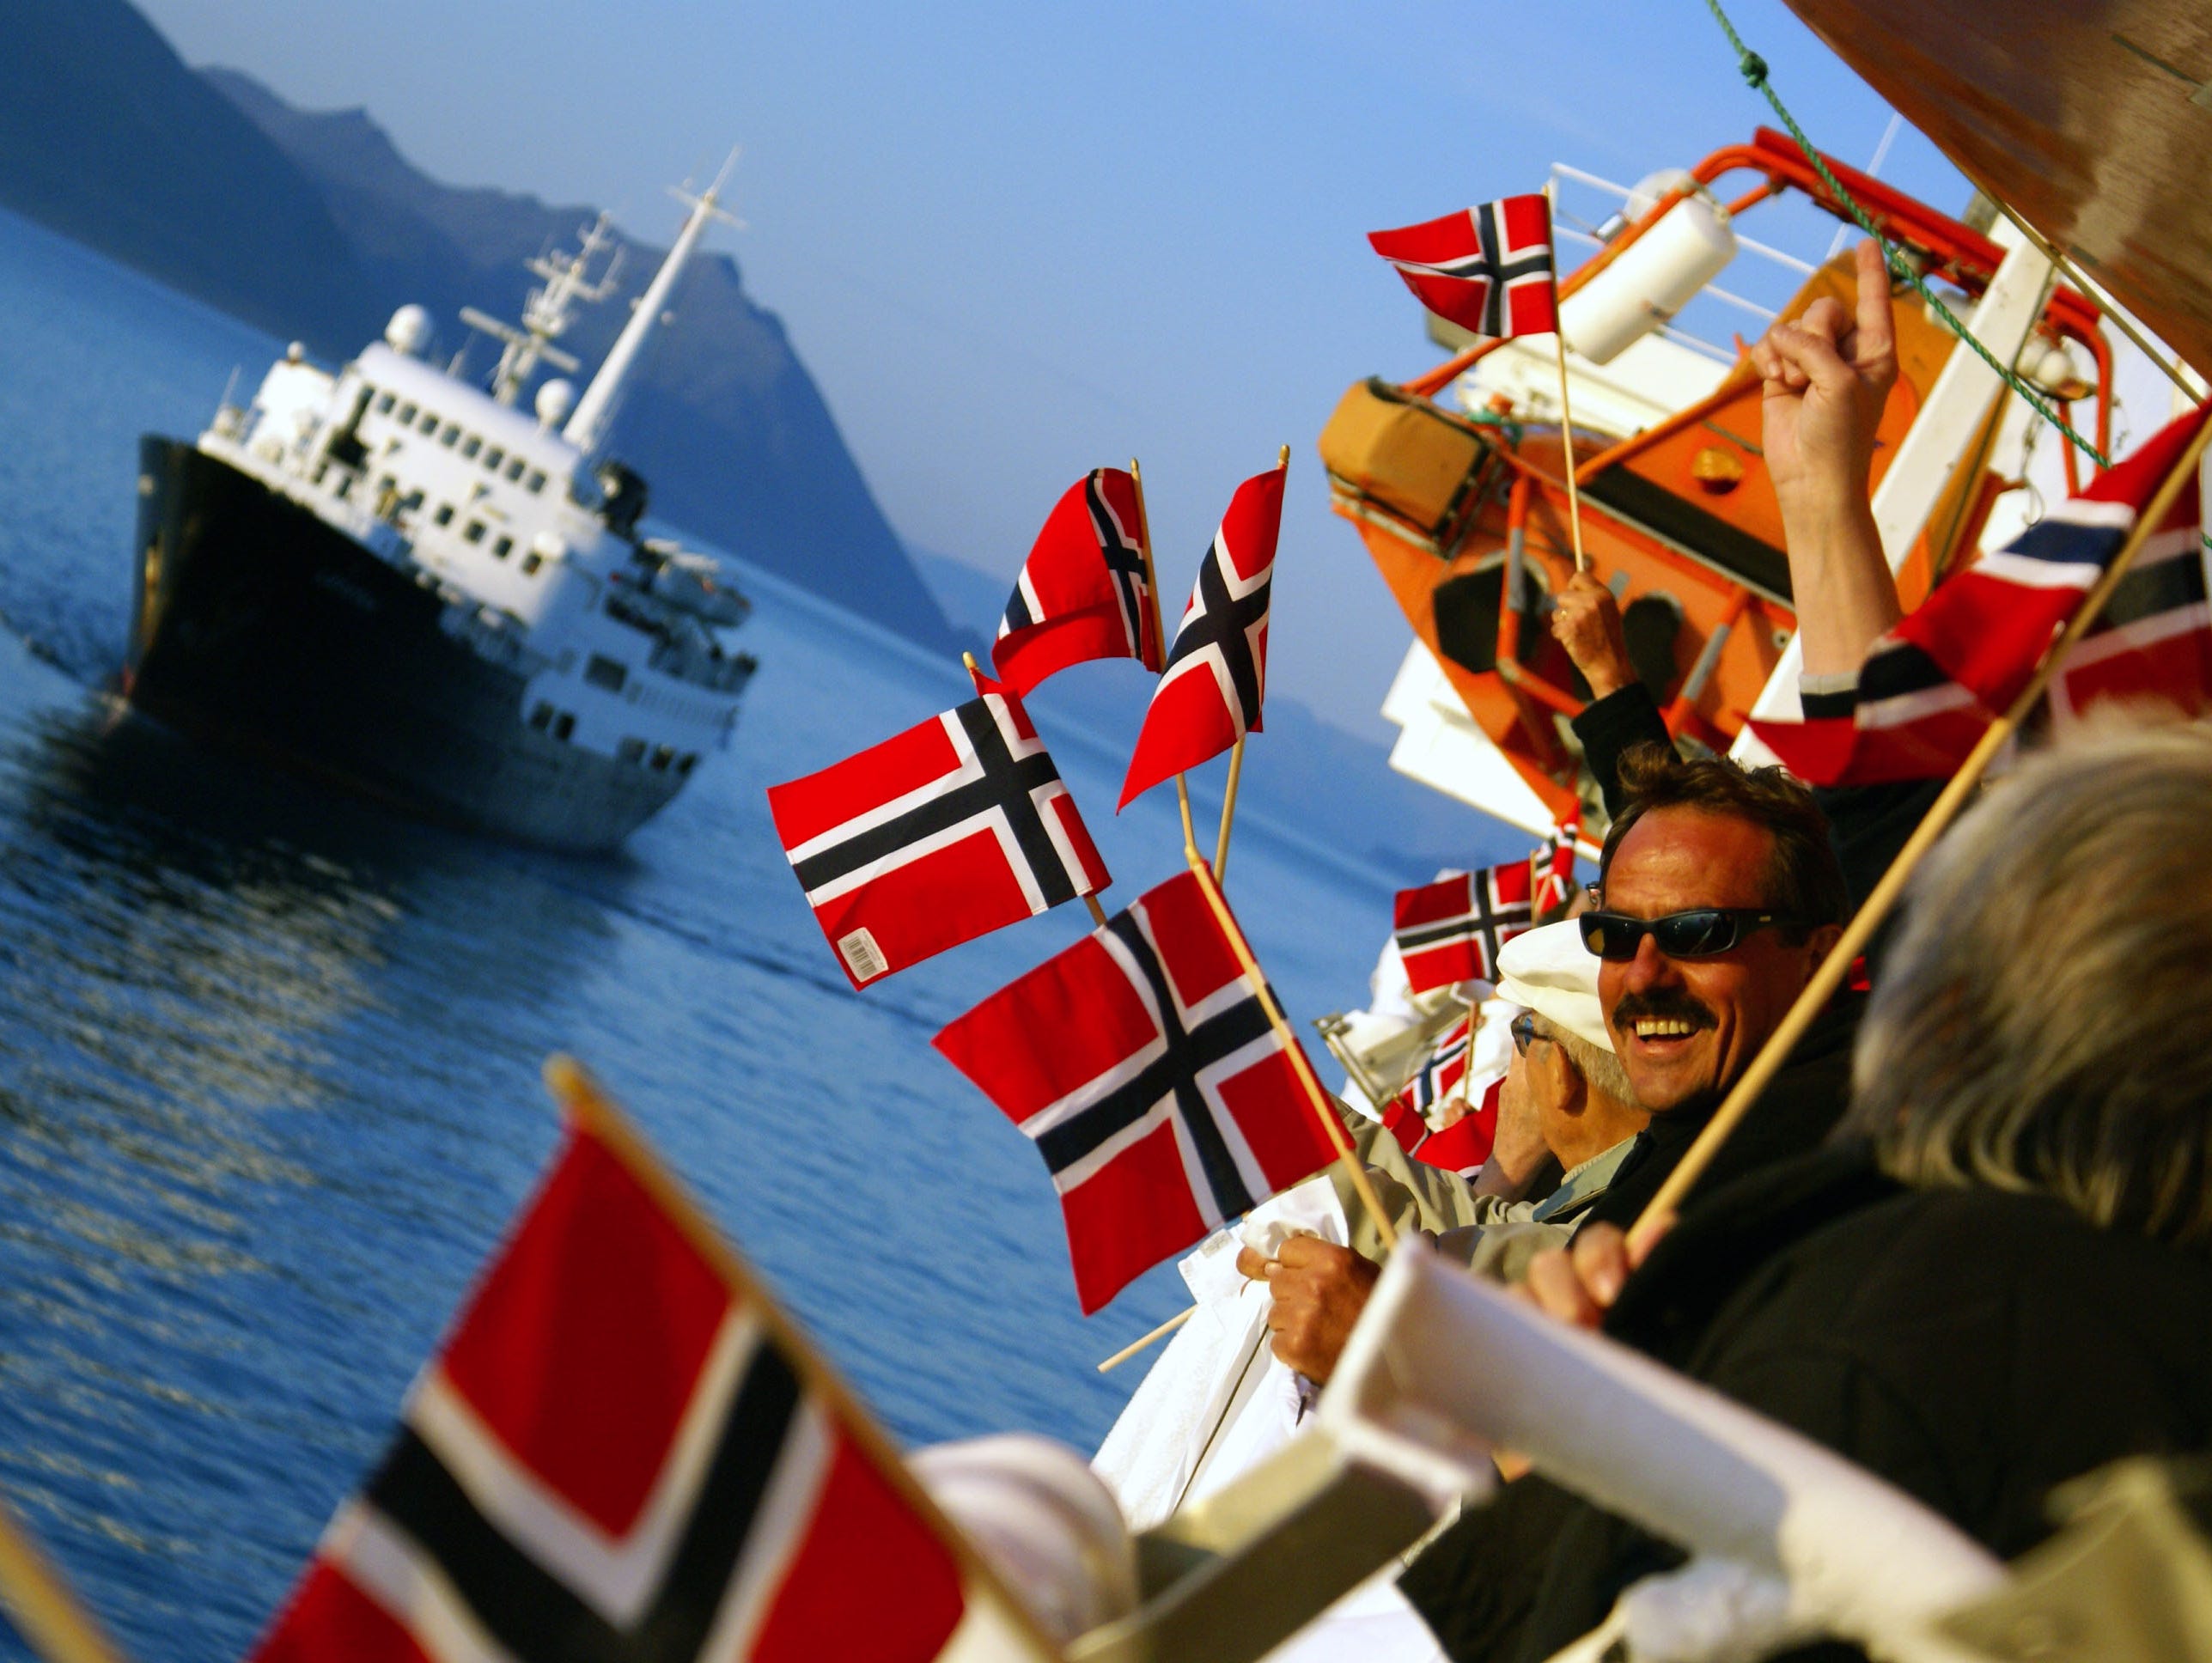 The 340-passenger Lofoten travels the scenic, fjord-lined coast of Norway.